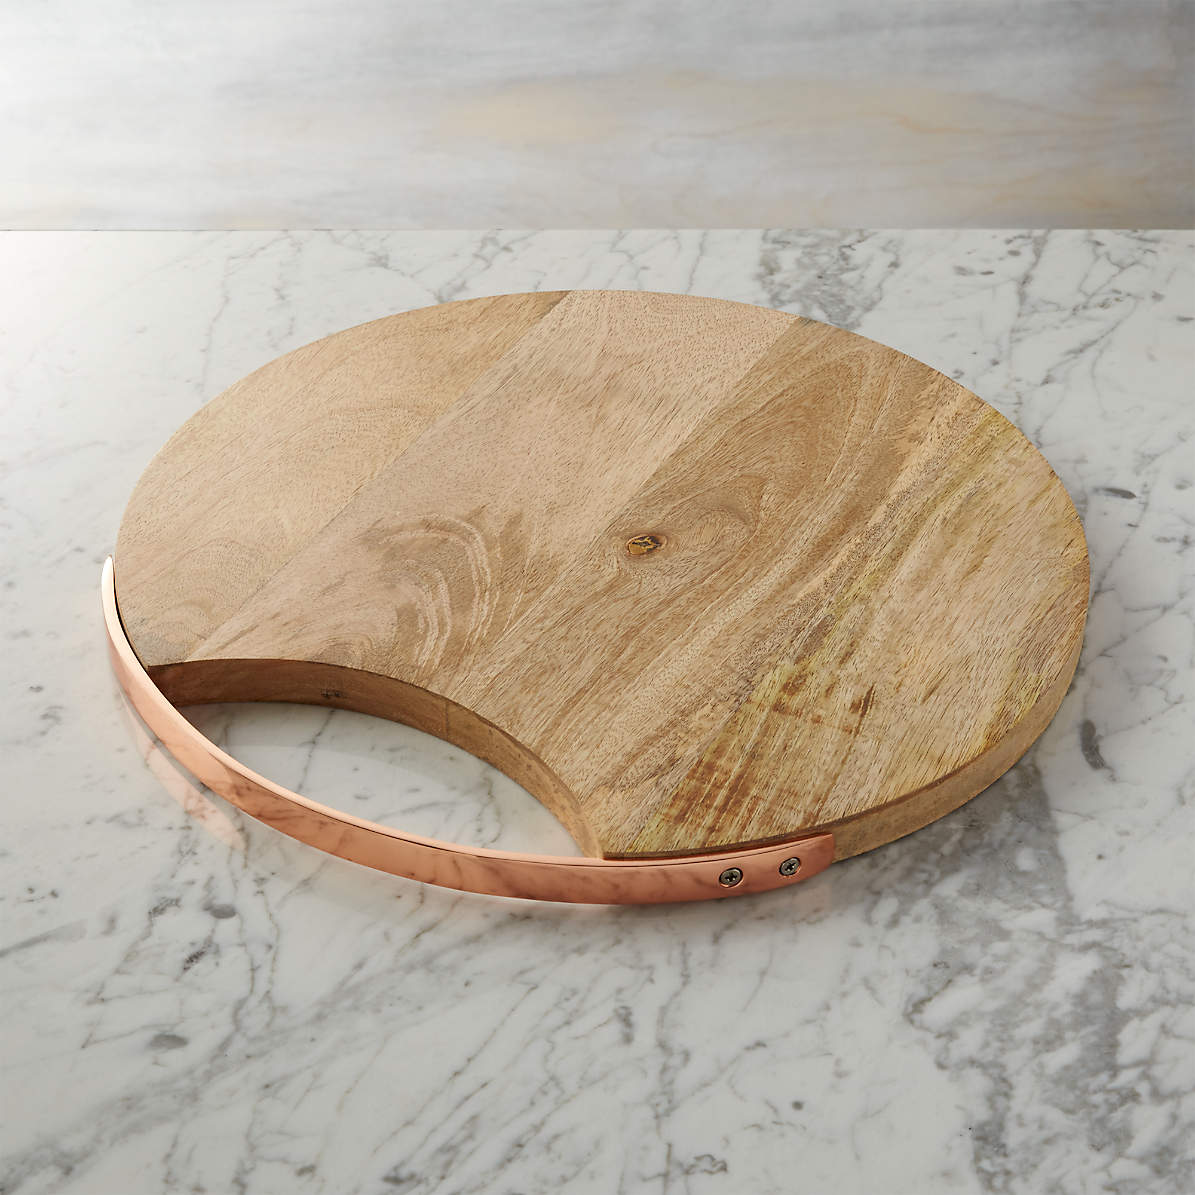 Round Wooden Cheese Board Reviews, Round Wooden Cheese Board With Handle